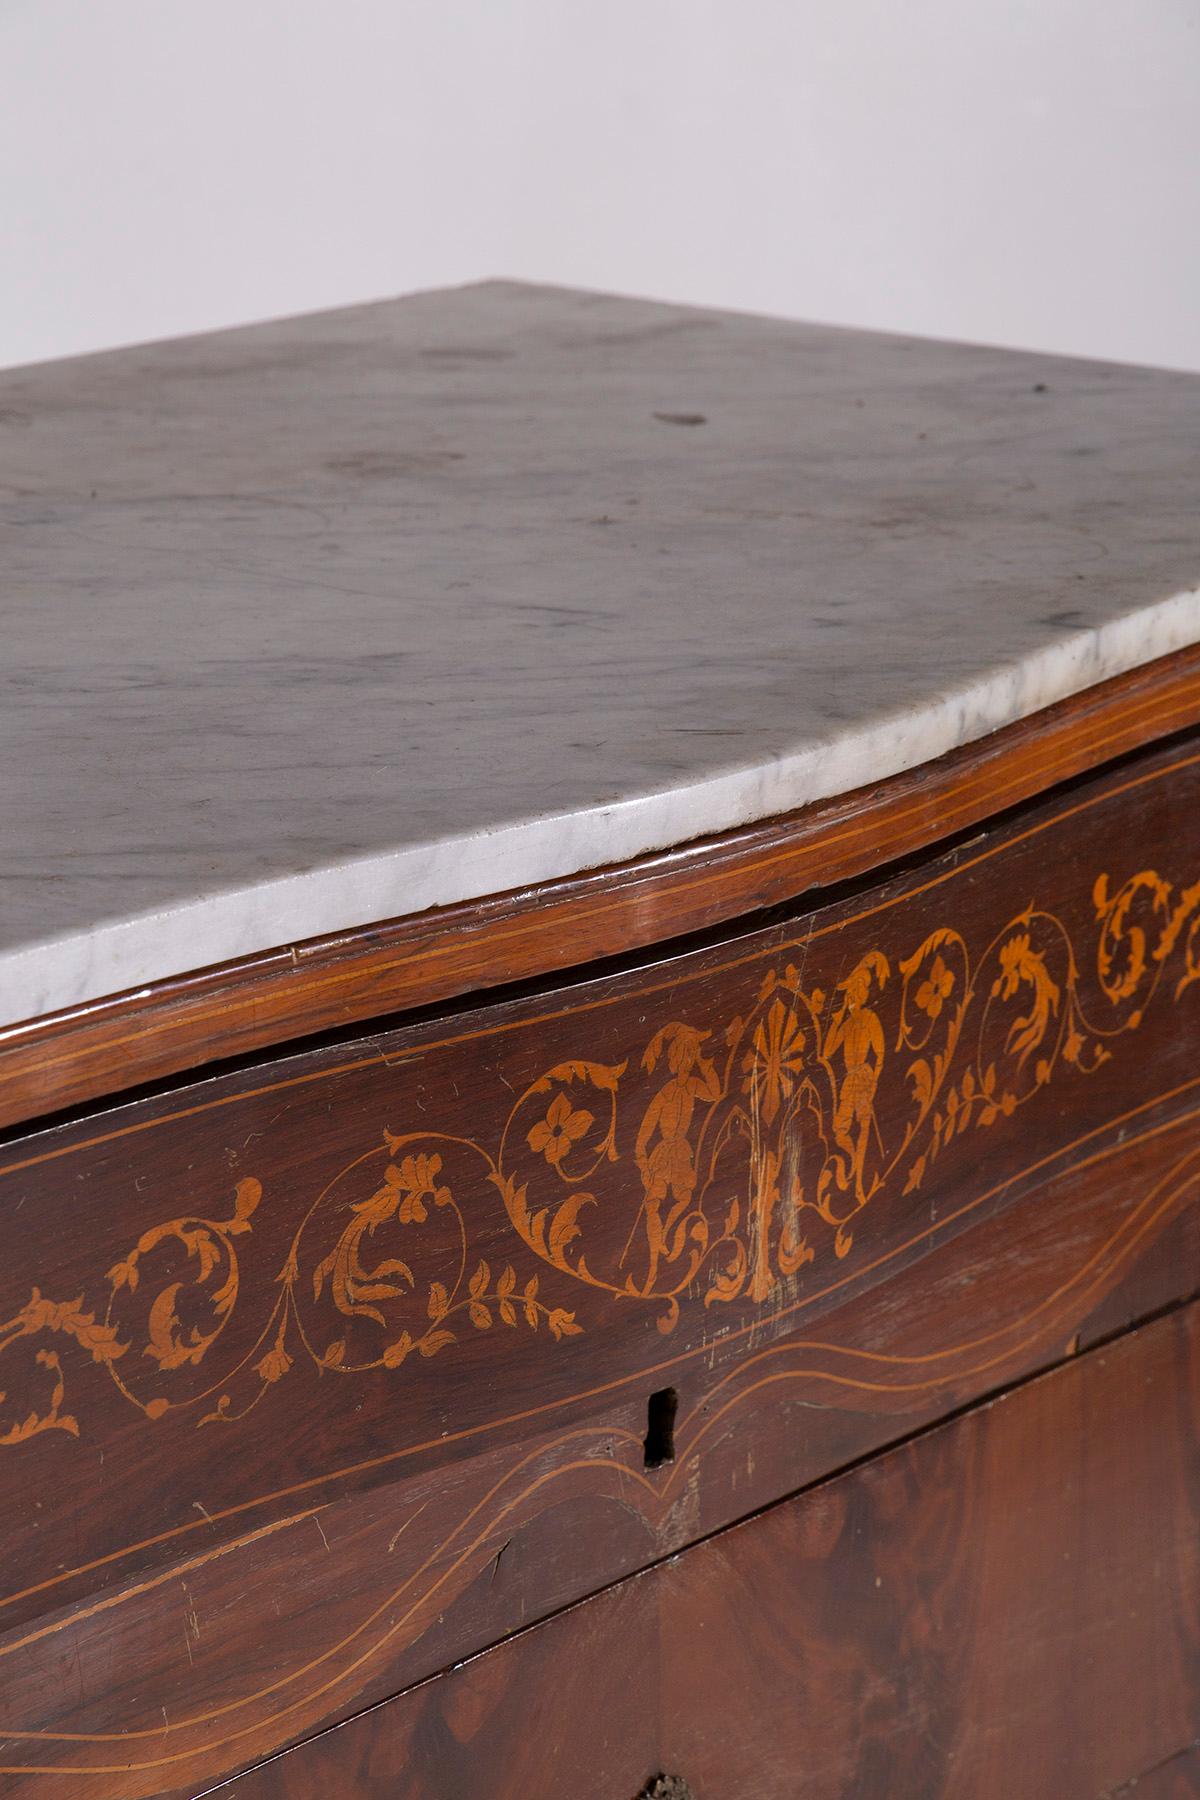 In the vast world of antique furnishings, few pieces have the ability to convey intrinsic beauty and artisanal mastery as profoundly as the exquisite Italian walnut chest of drawers from the late 18th and early 19th centuries. This remarkable piece